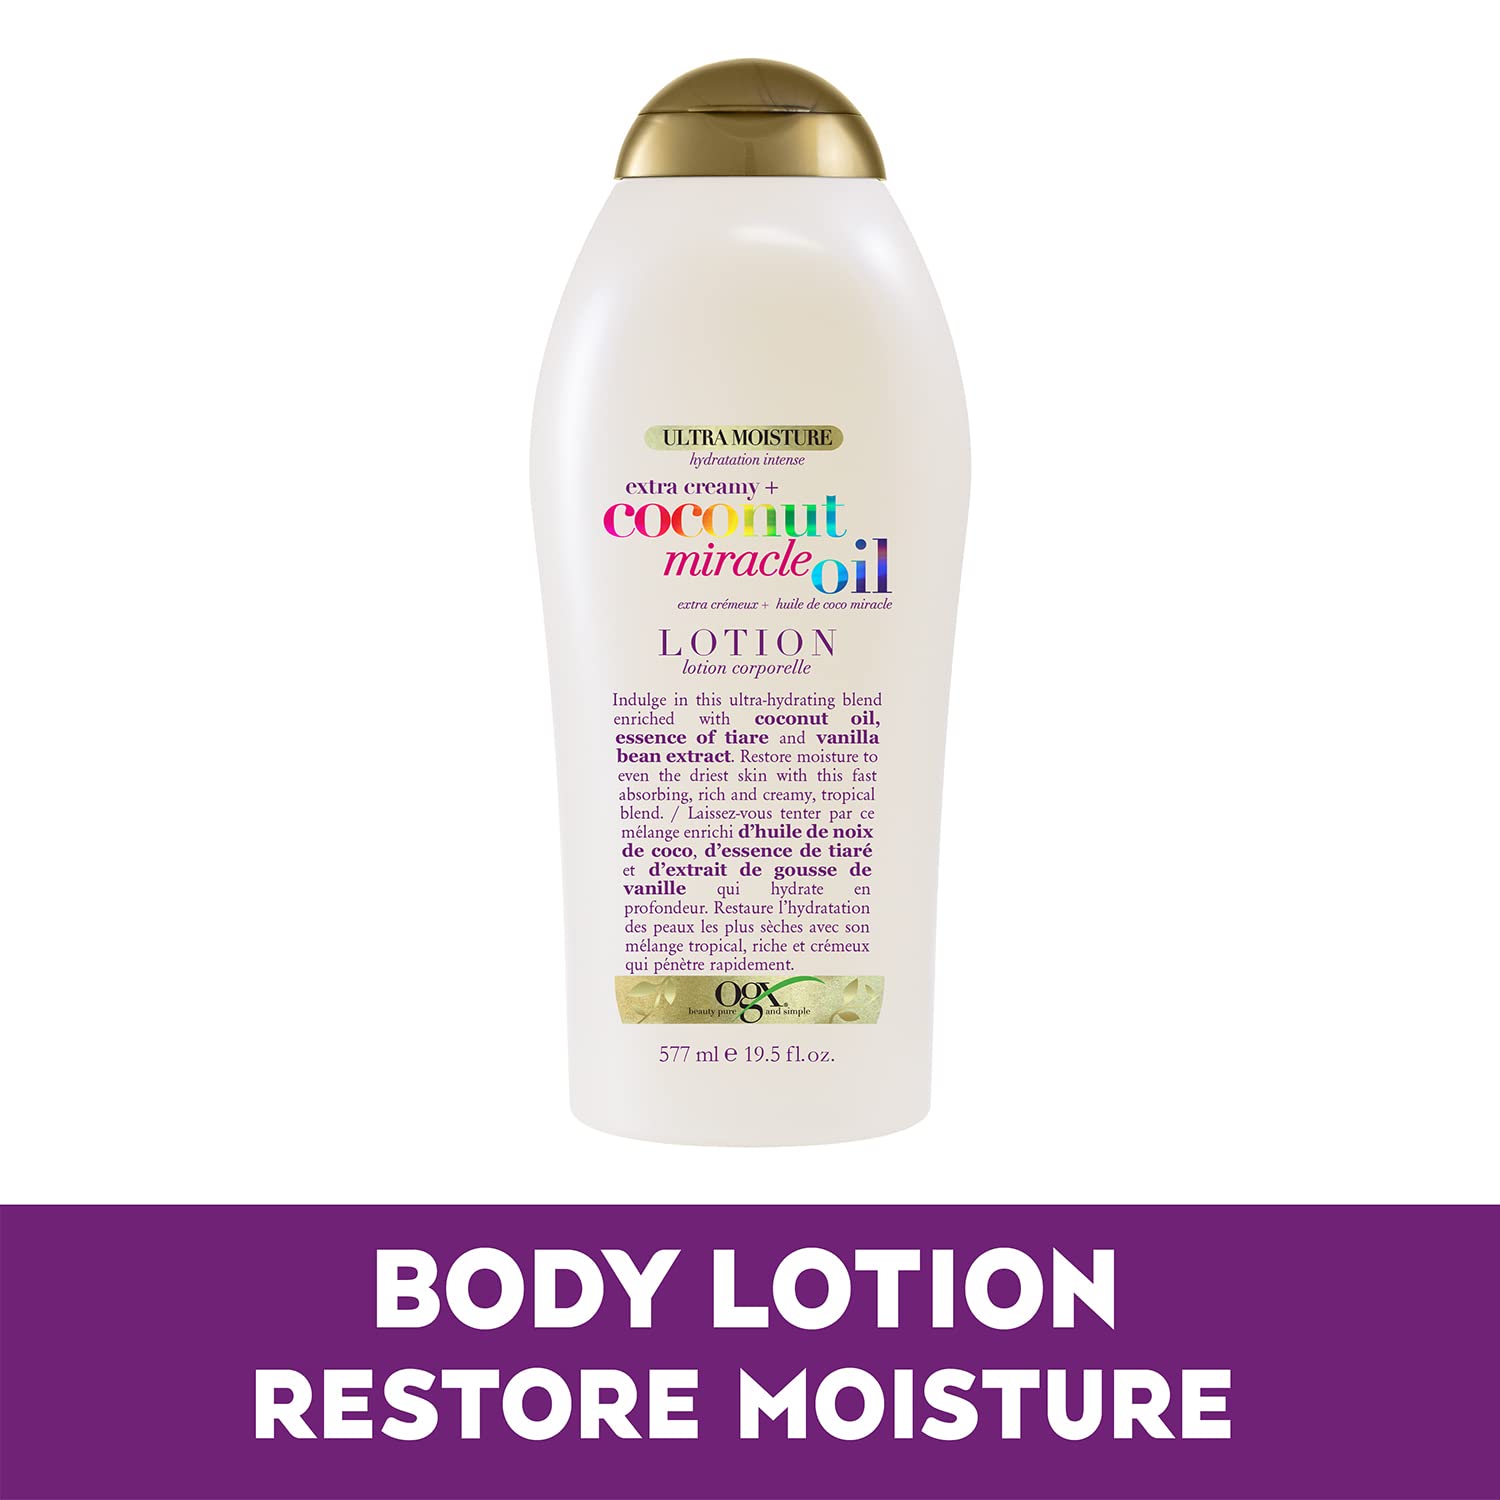 OGX Extra Creamy + Coconut Miracle Oil Ultra Moisture Body Wash, 19.5 Fl Oz Extra Creamy + Coconut Miracle Oil Ultra Moisture Body Lotion with Vanilla Bean, Fast-Absorbing